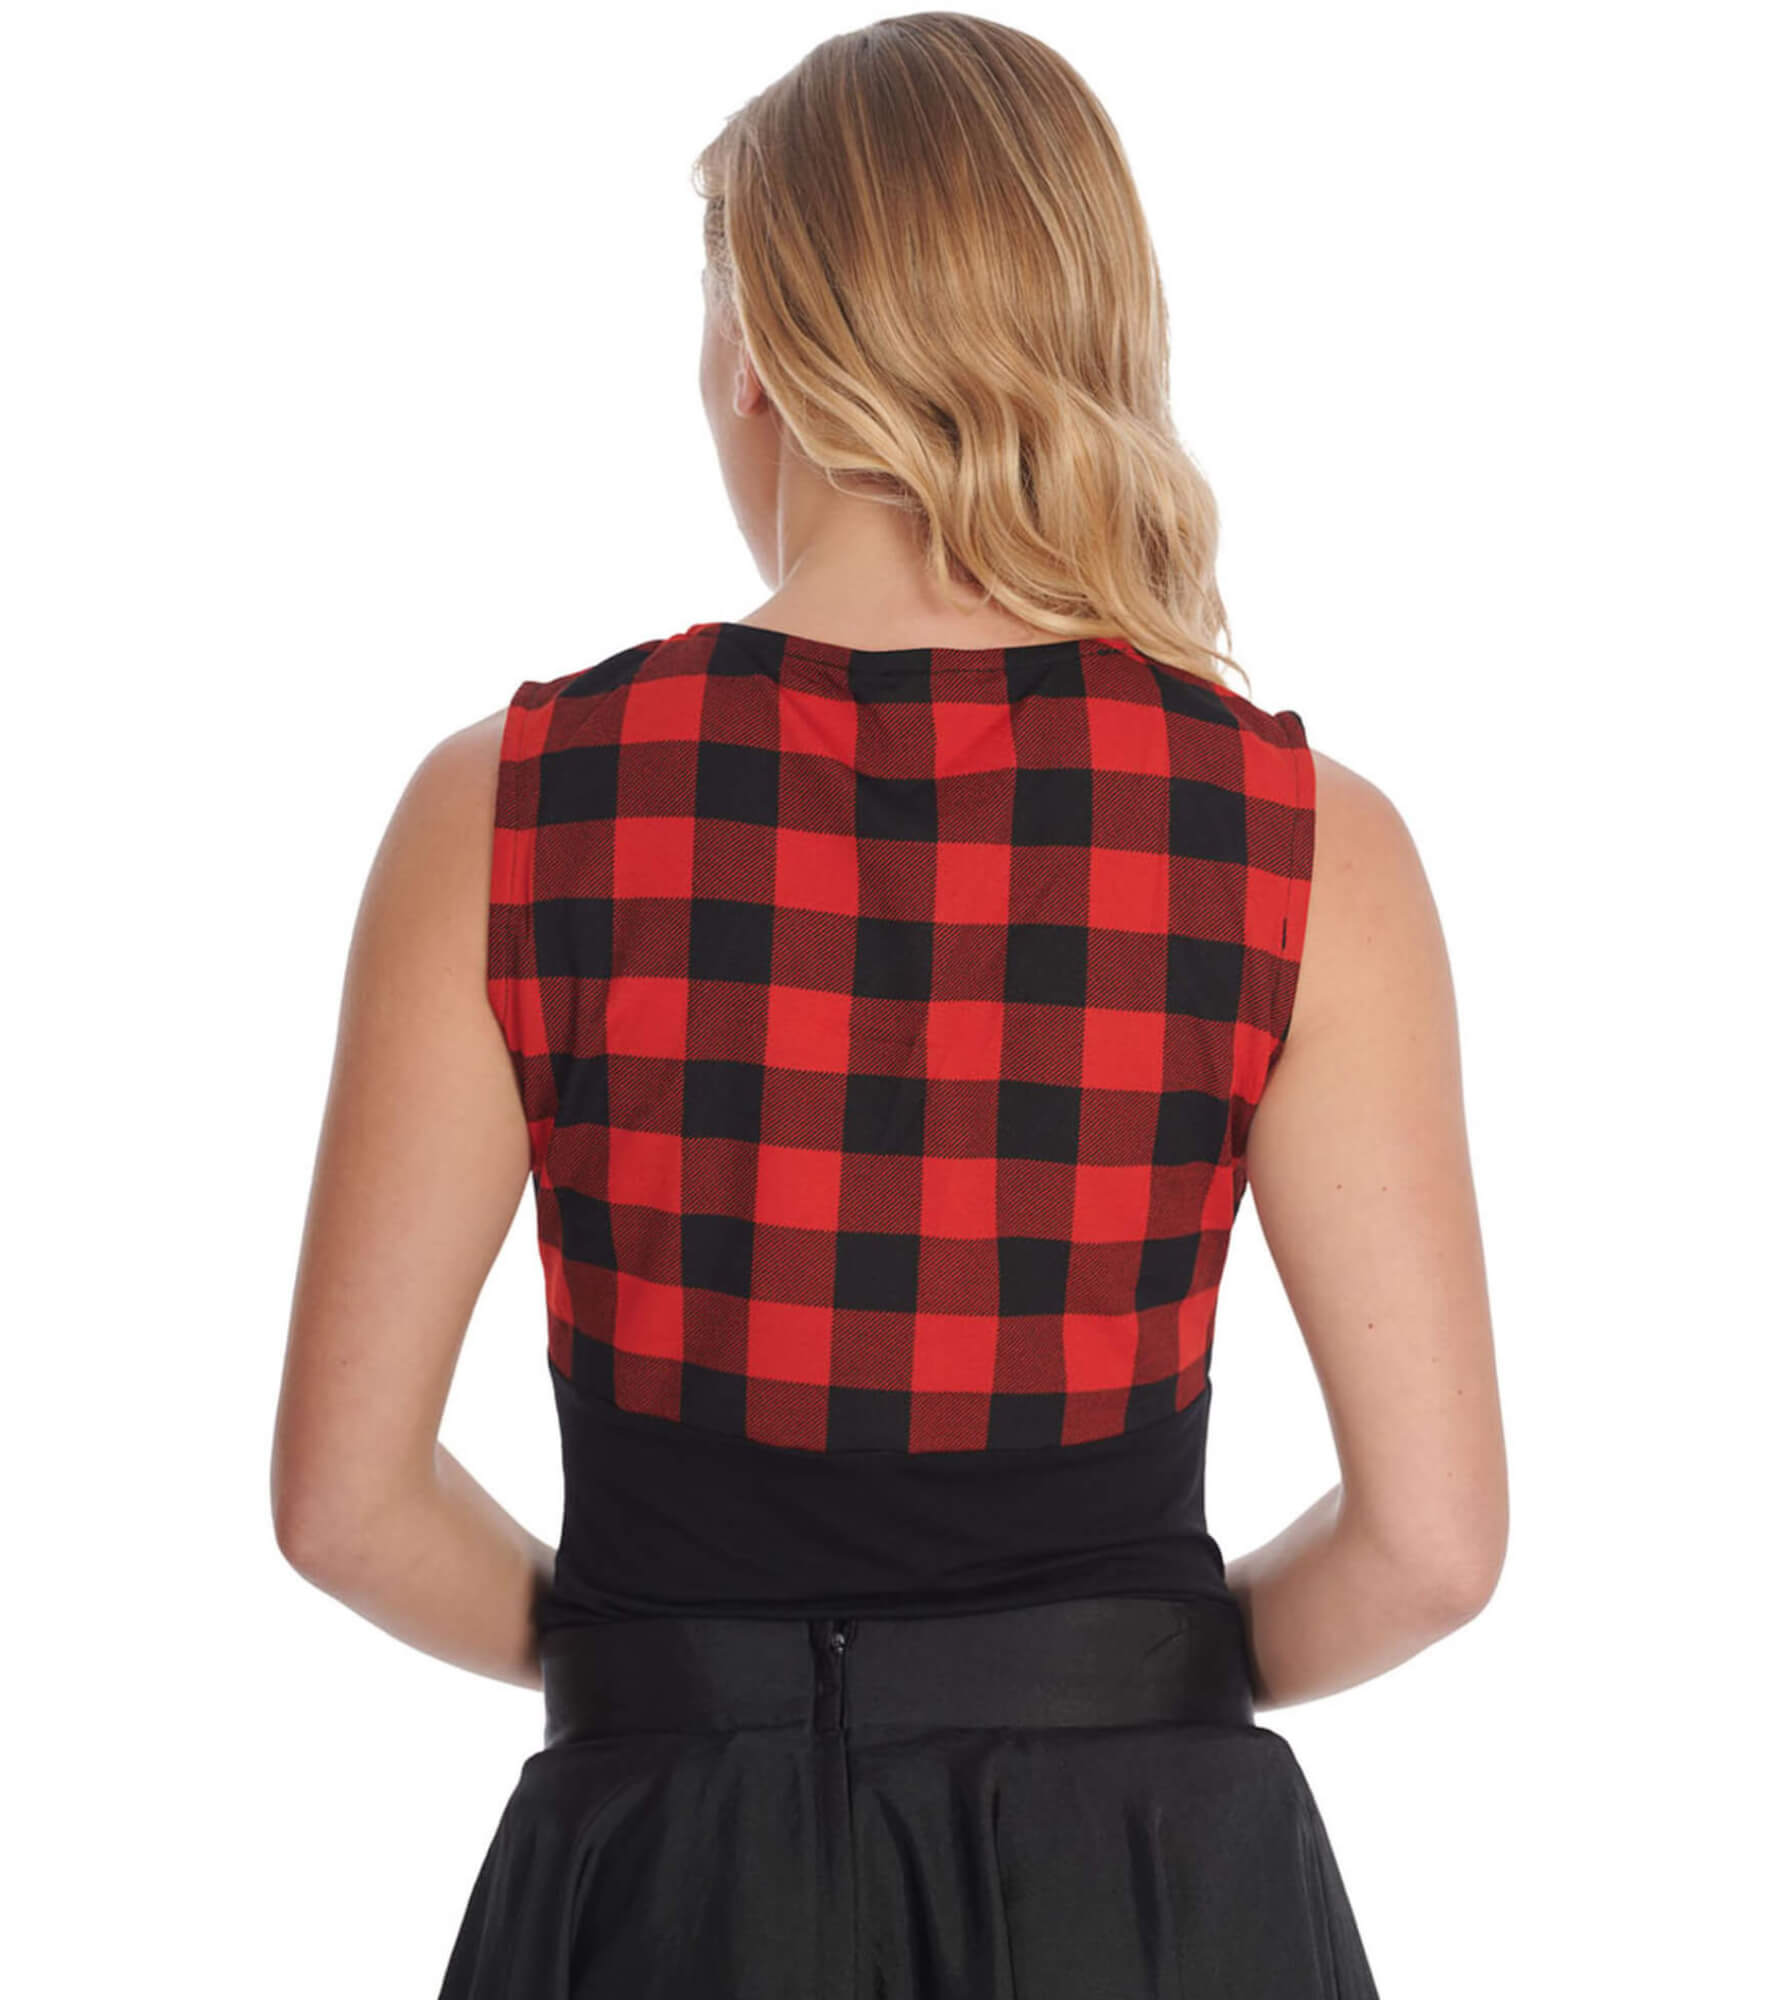 Banned Check & Cherry Skull Rockabilly Tie Front Top